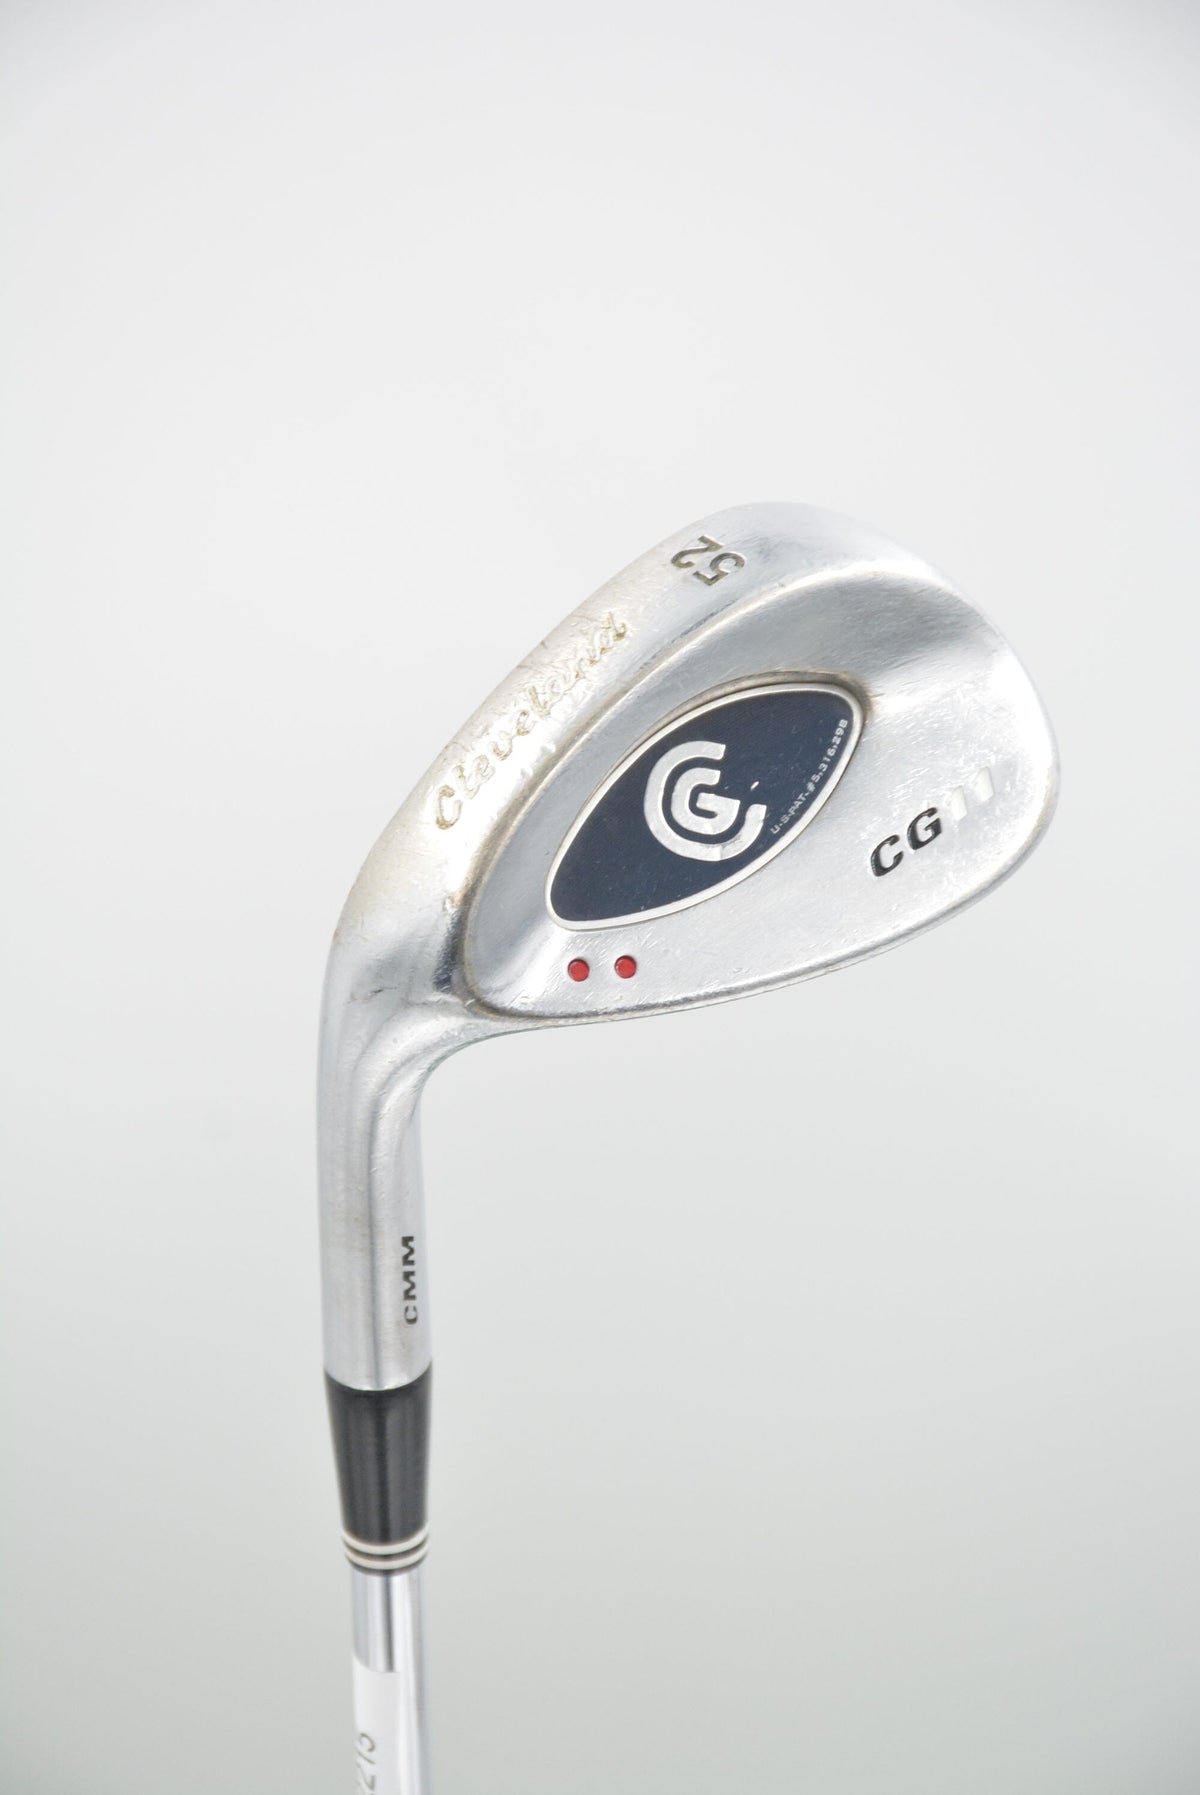 Lefty Cleveland CG11 52 Degree Wedge Wedge Flex Golf Clubs GolfRoots 